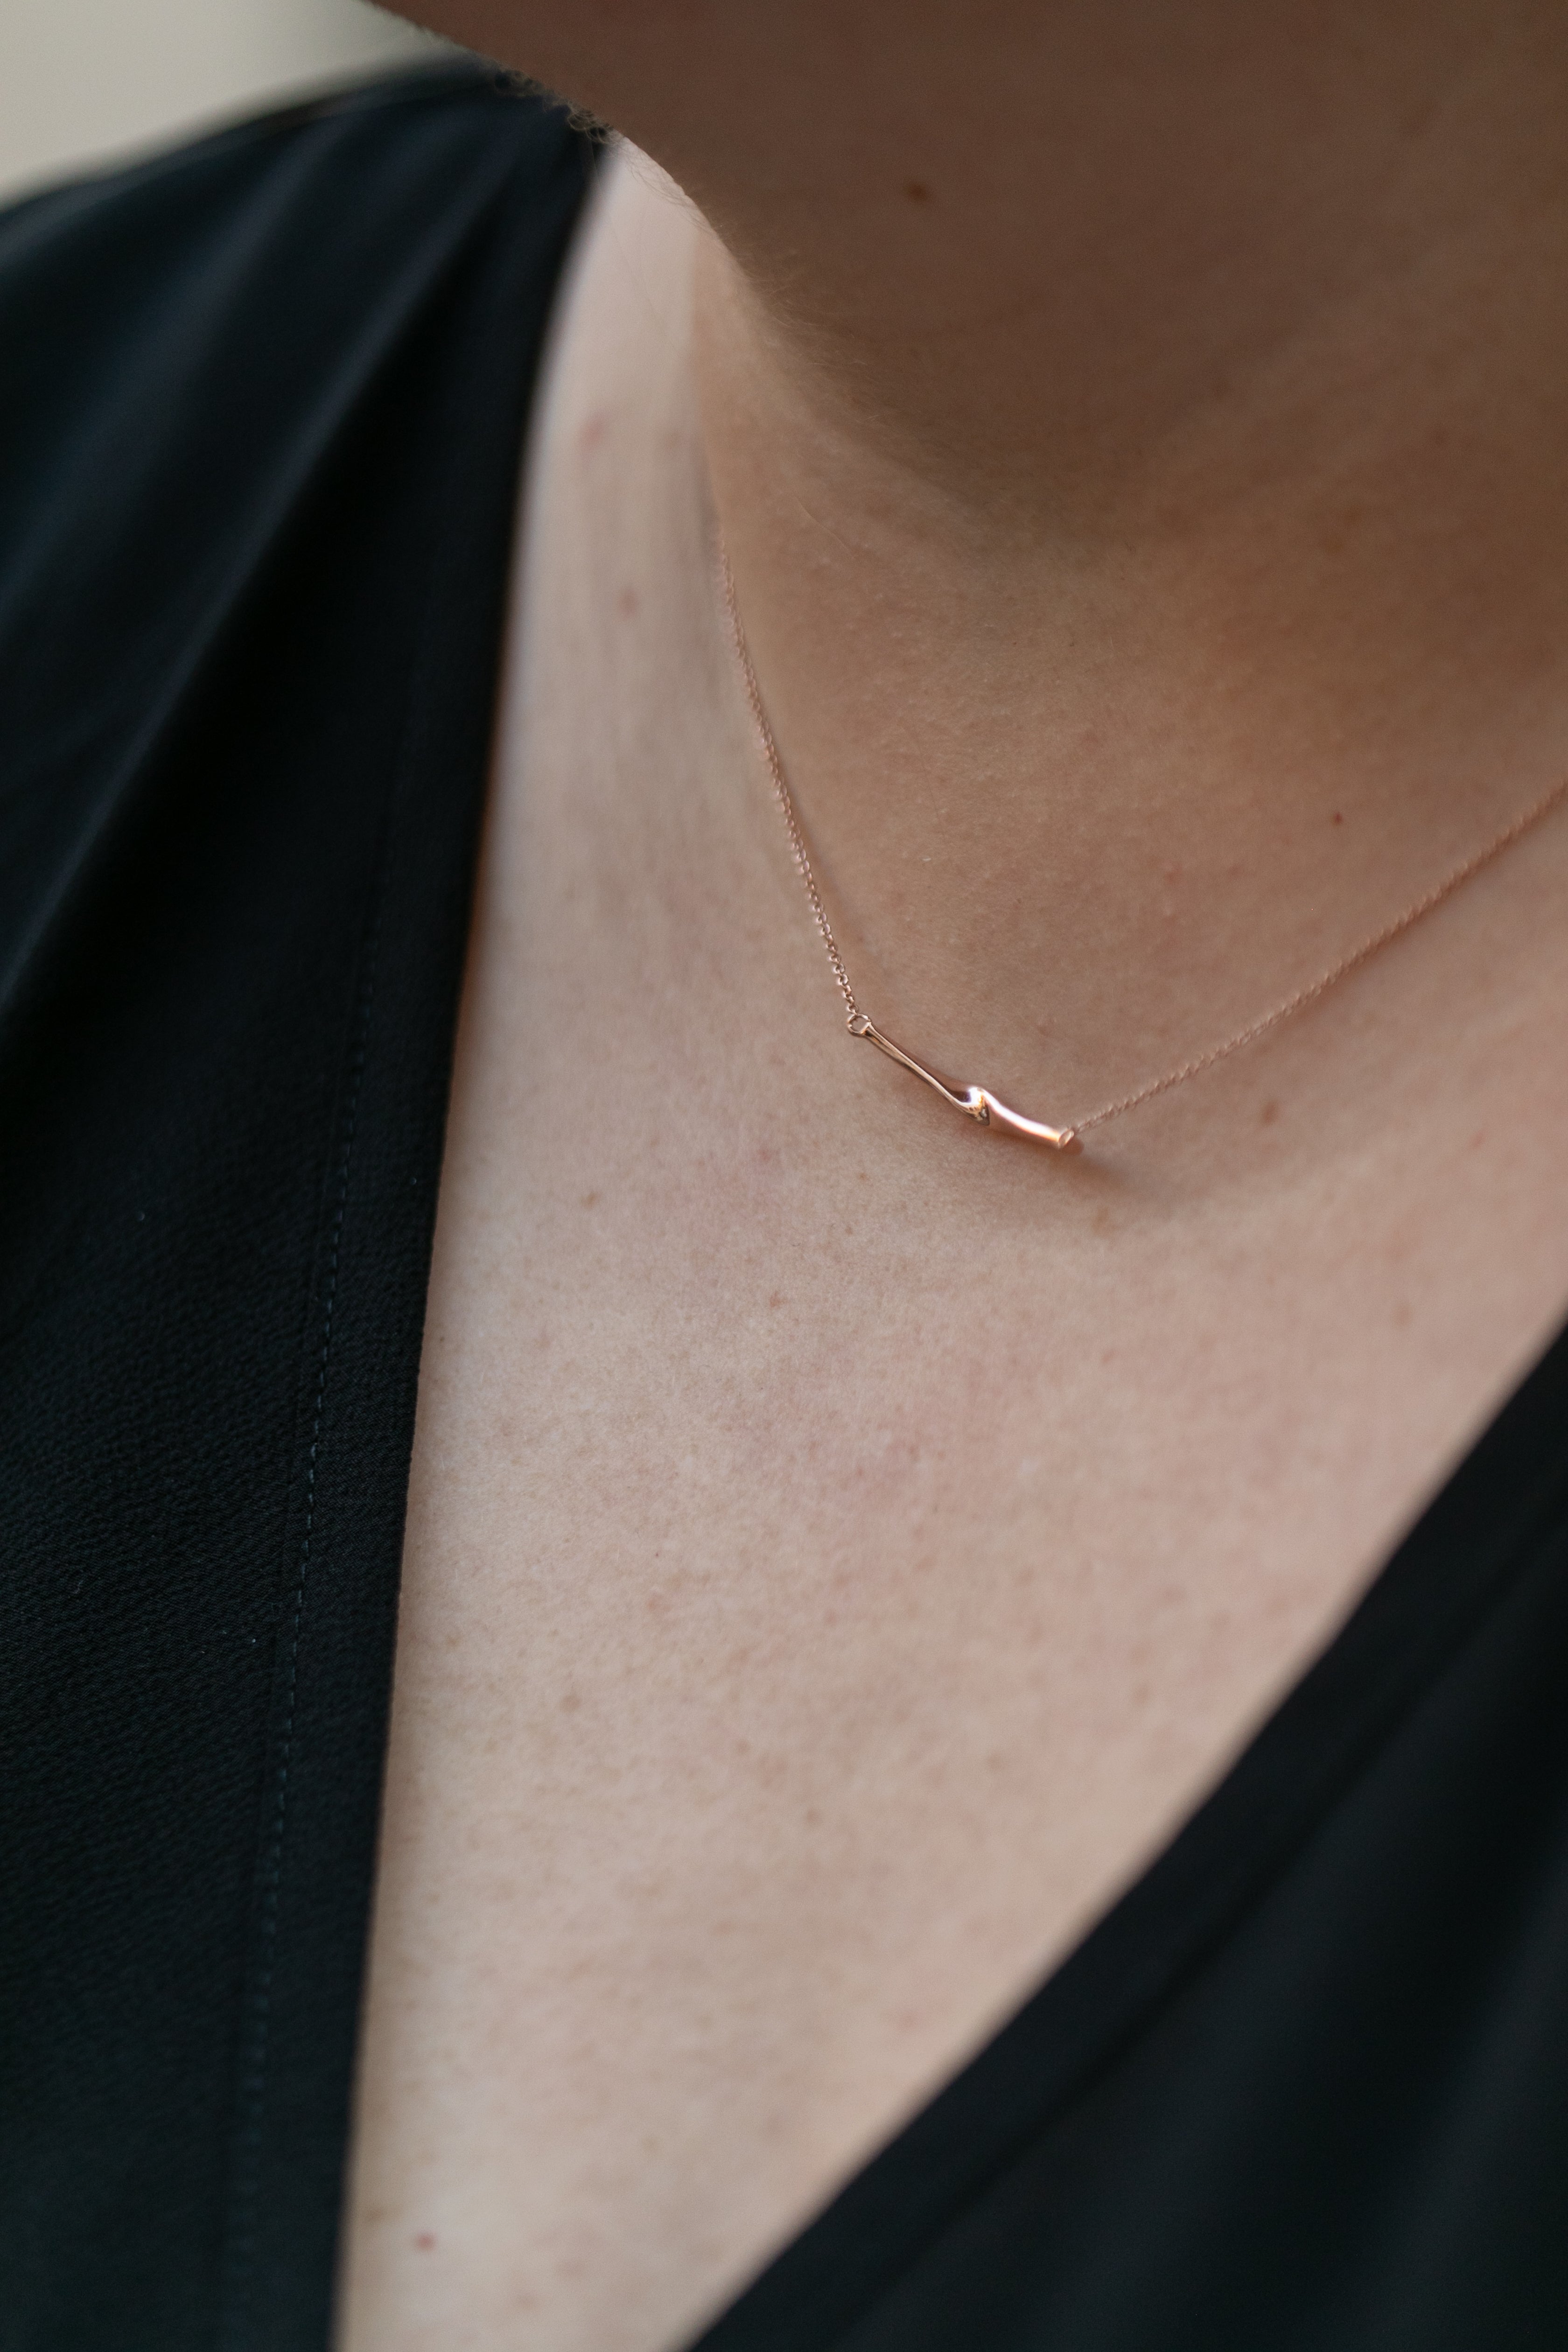 a close up of a woman's neck wearing a rose gold twist necklace.